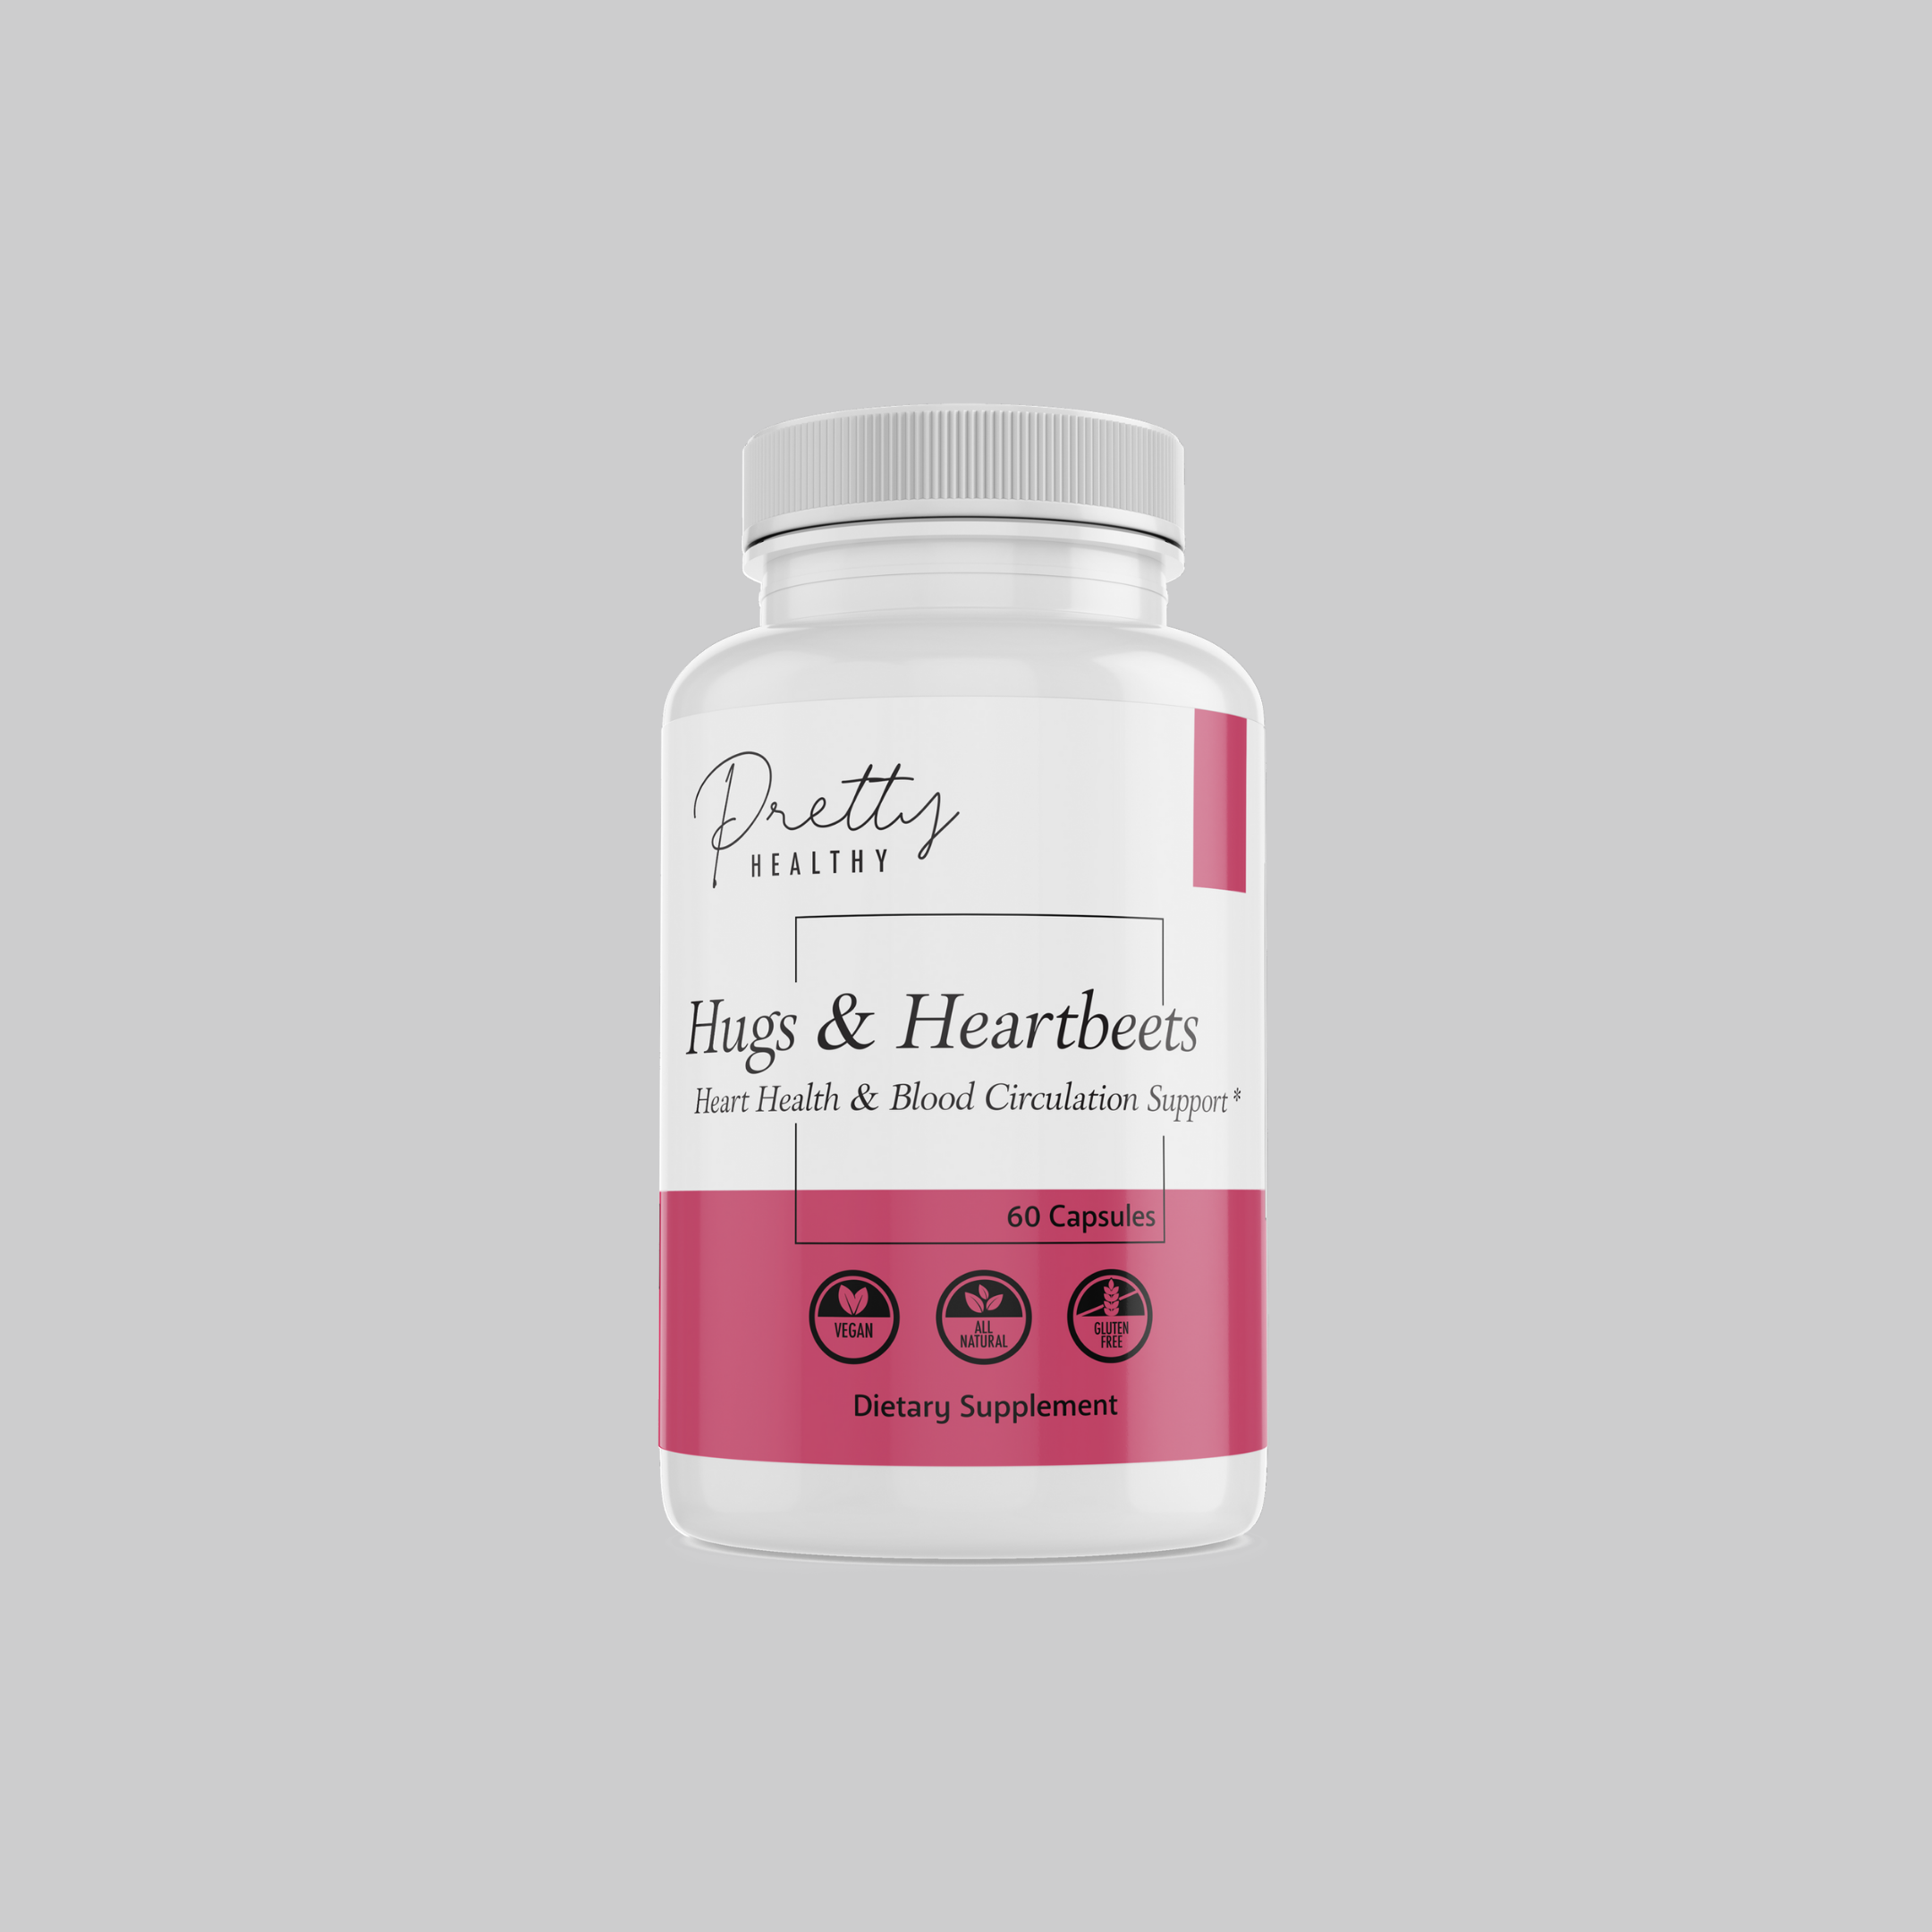 Hugs & Heartbeets- Heart Health & Blood Circulation Support